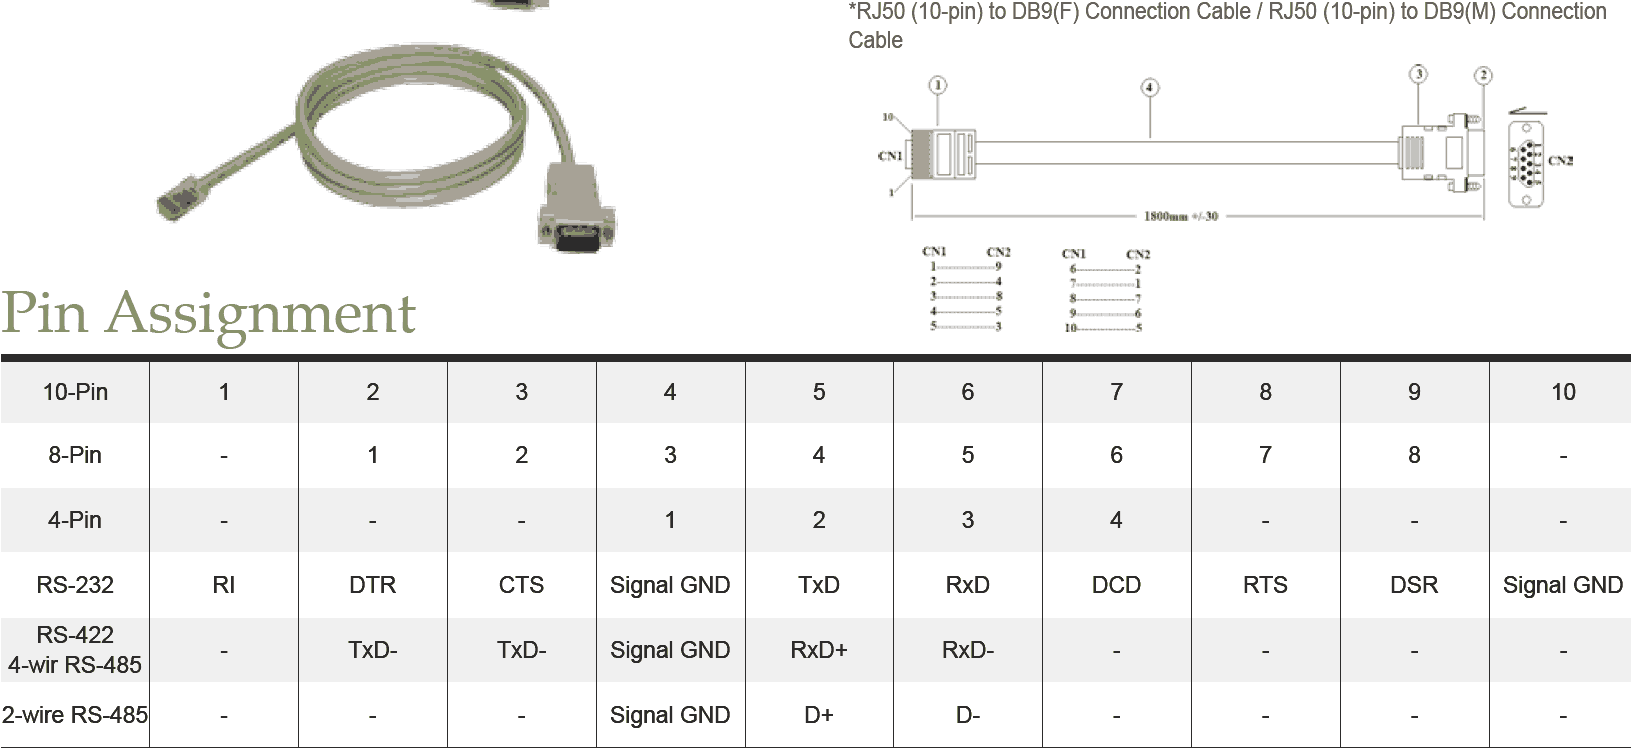 RJ50 (10-pin) to DB9(F) Connection Cable / RJ50 (10-pin) to DB9(M) Connection Cable